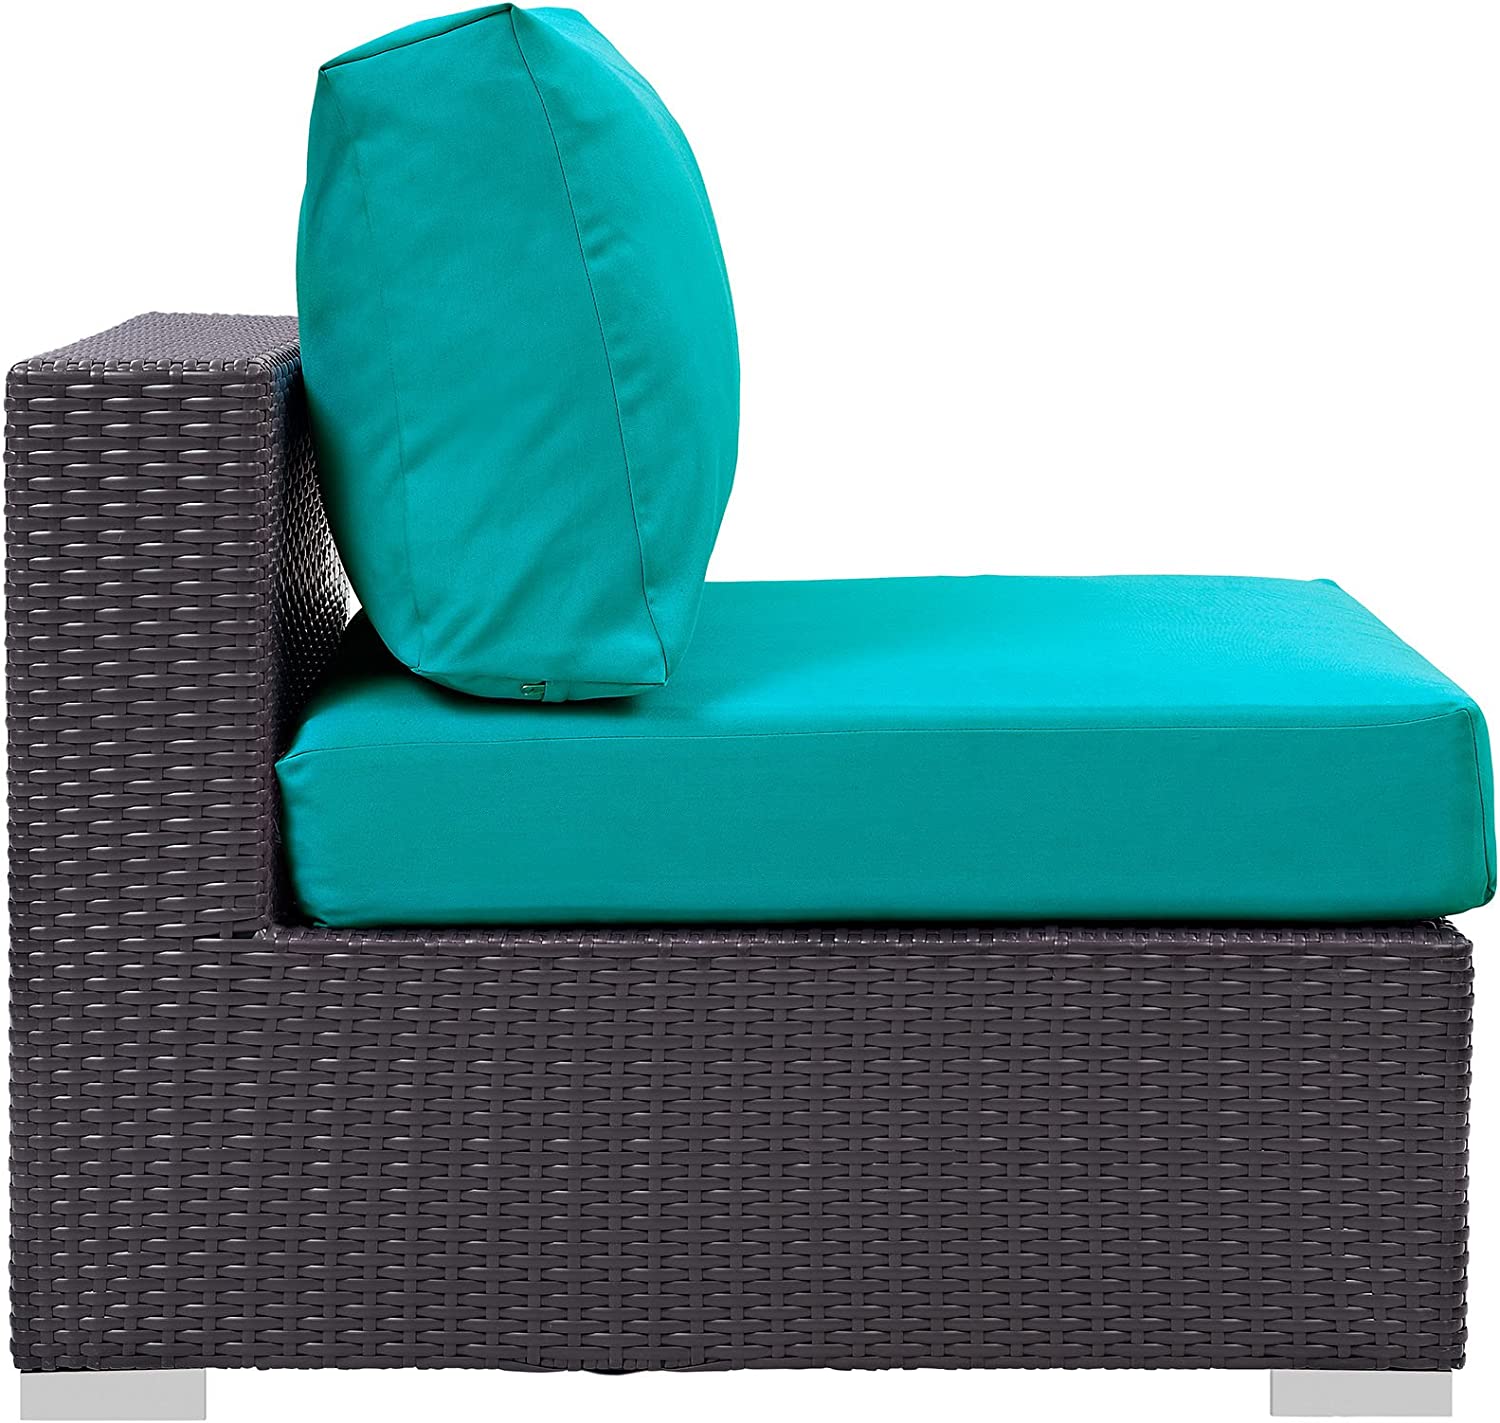 Modway Convene Wicker Rattan Outdoor Patio Sectional Sofa Armless Chair in Espresso Turquoise